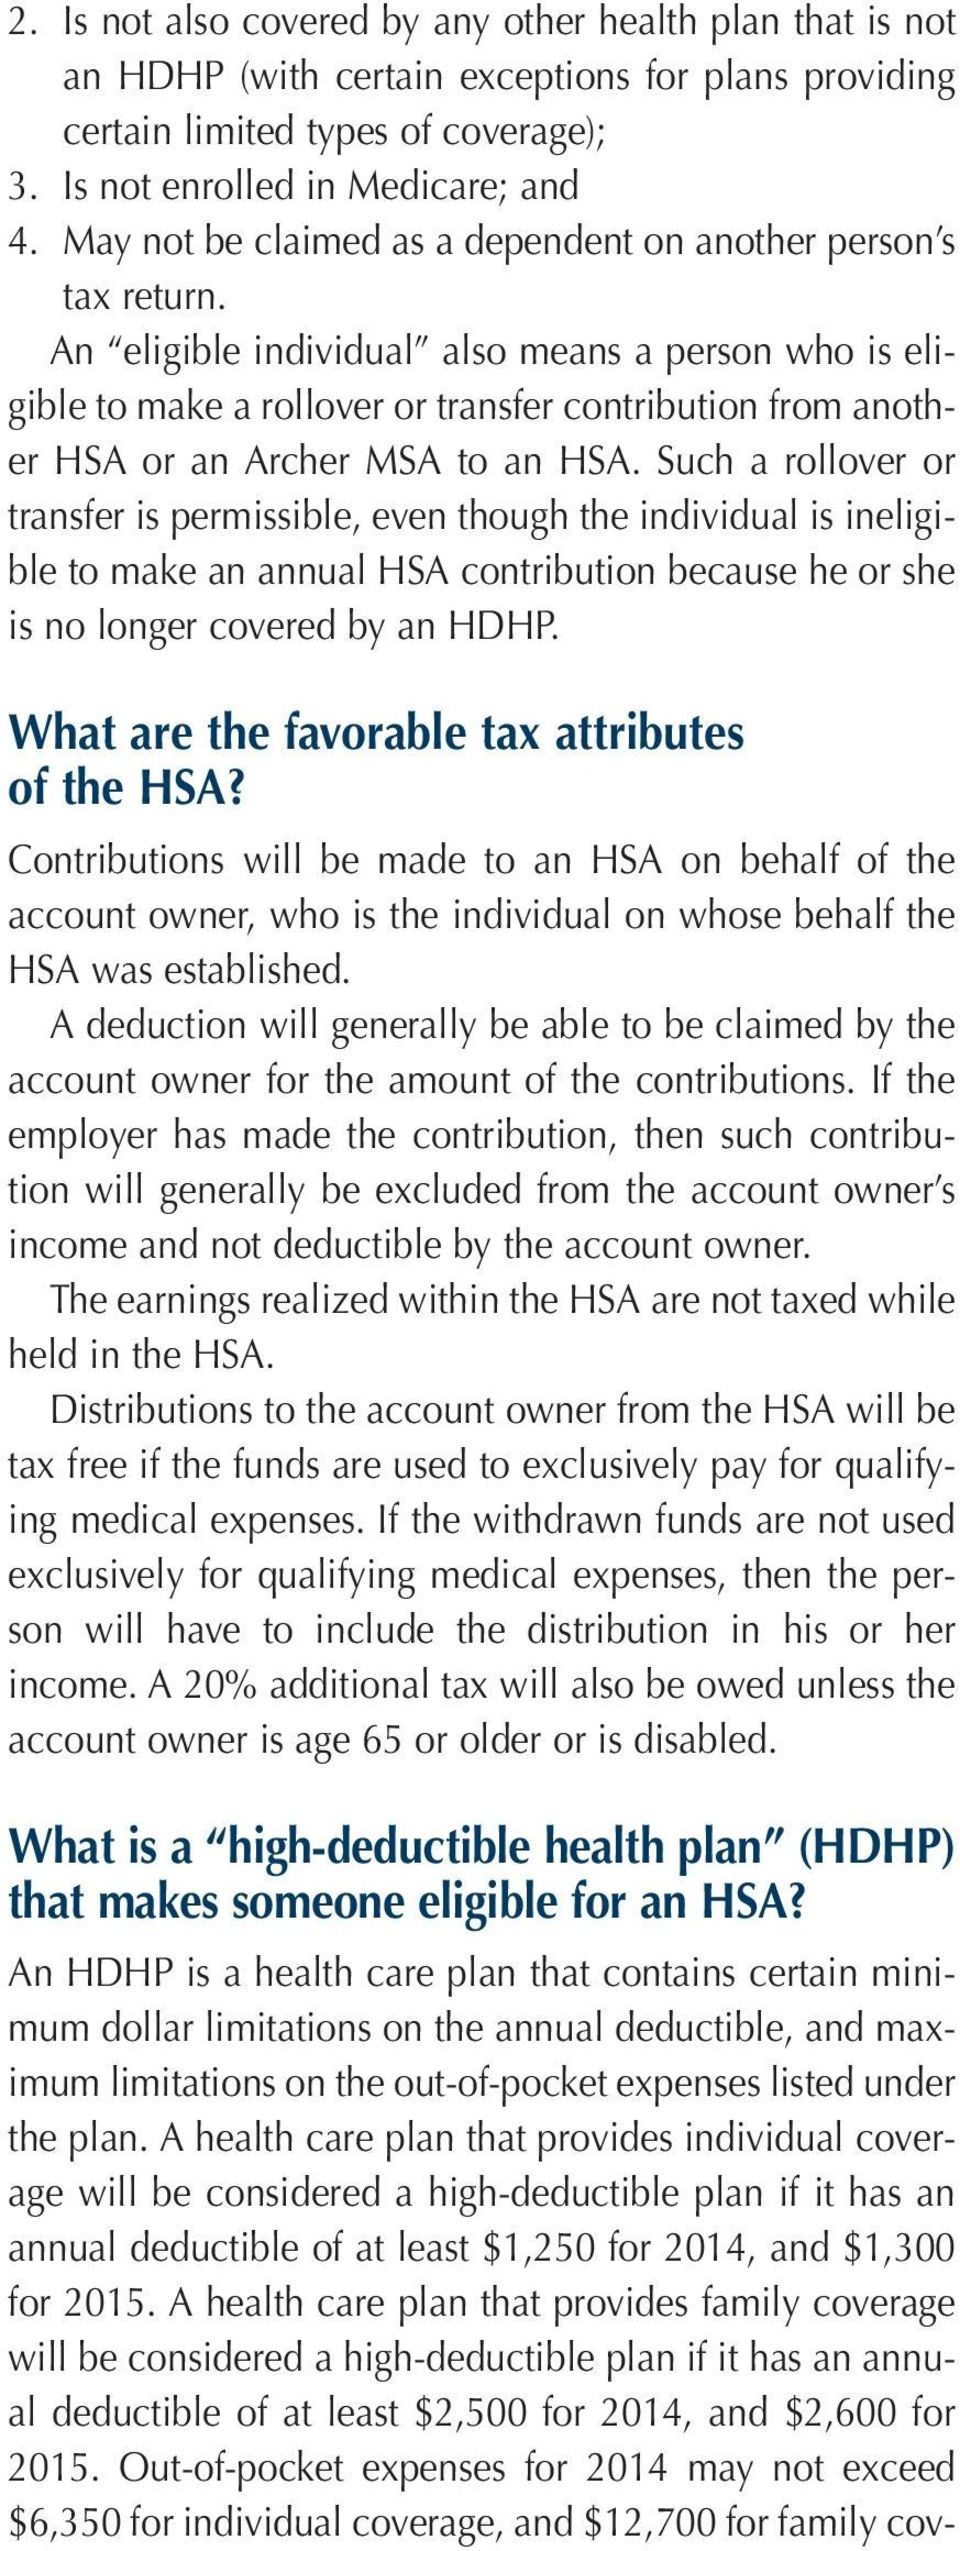 An eligible individual also means a person who is eligible to make a rollover or transfer contribution from another HSA or an Archer MSA to an HSA.